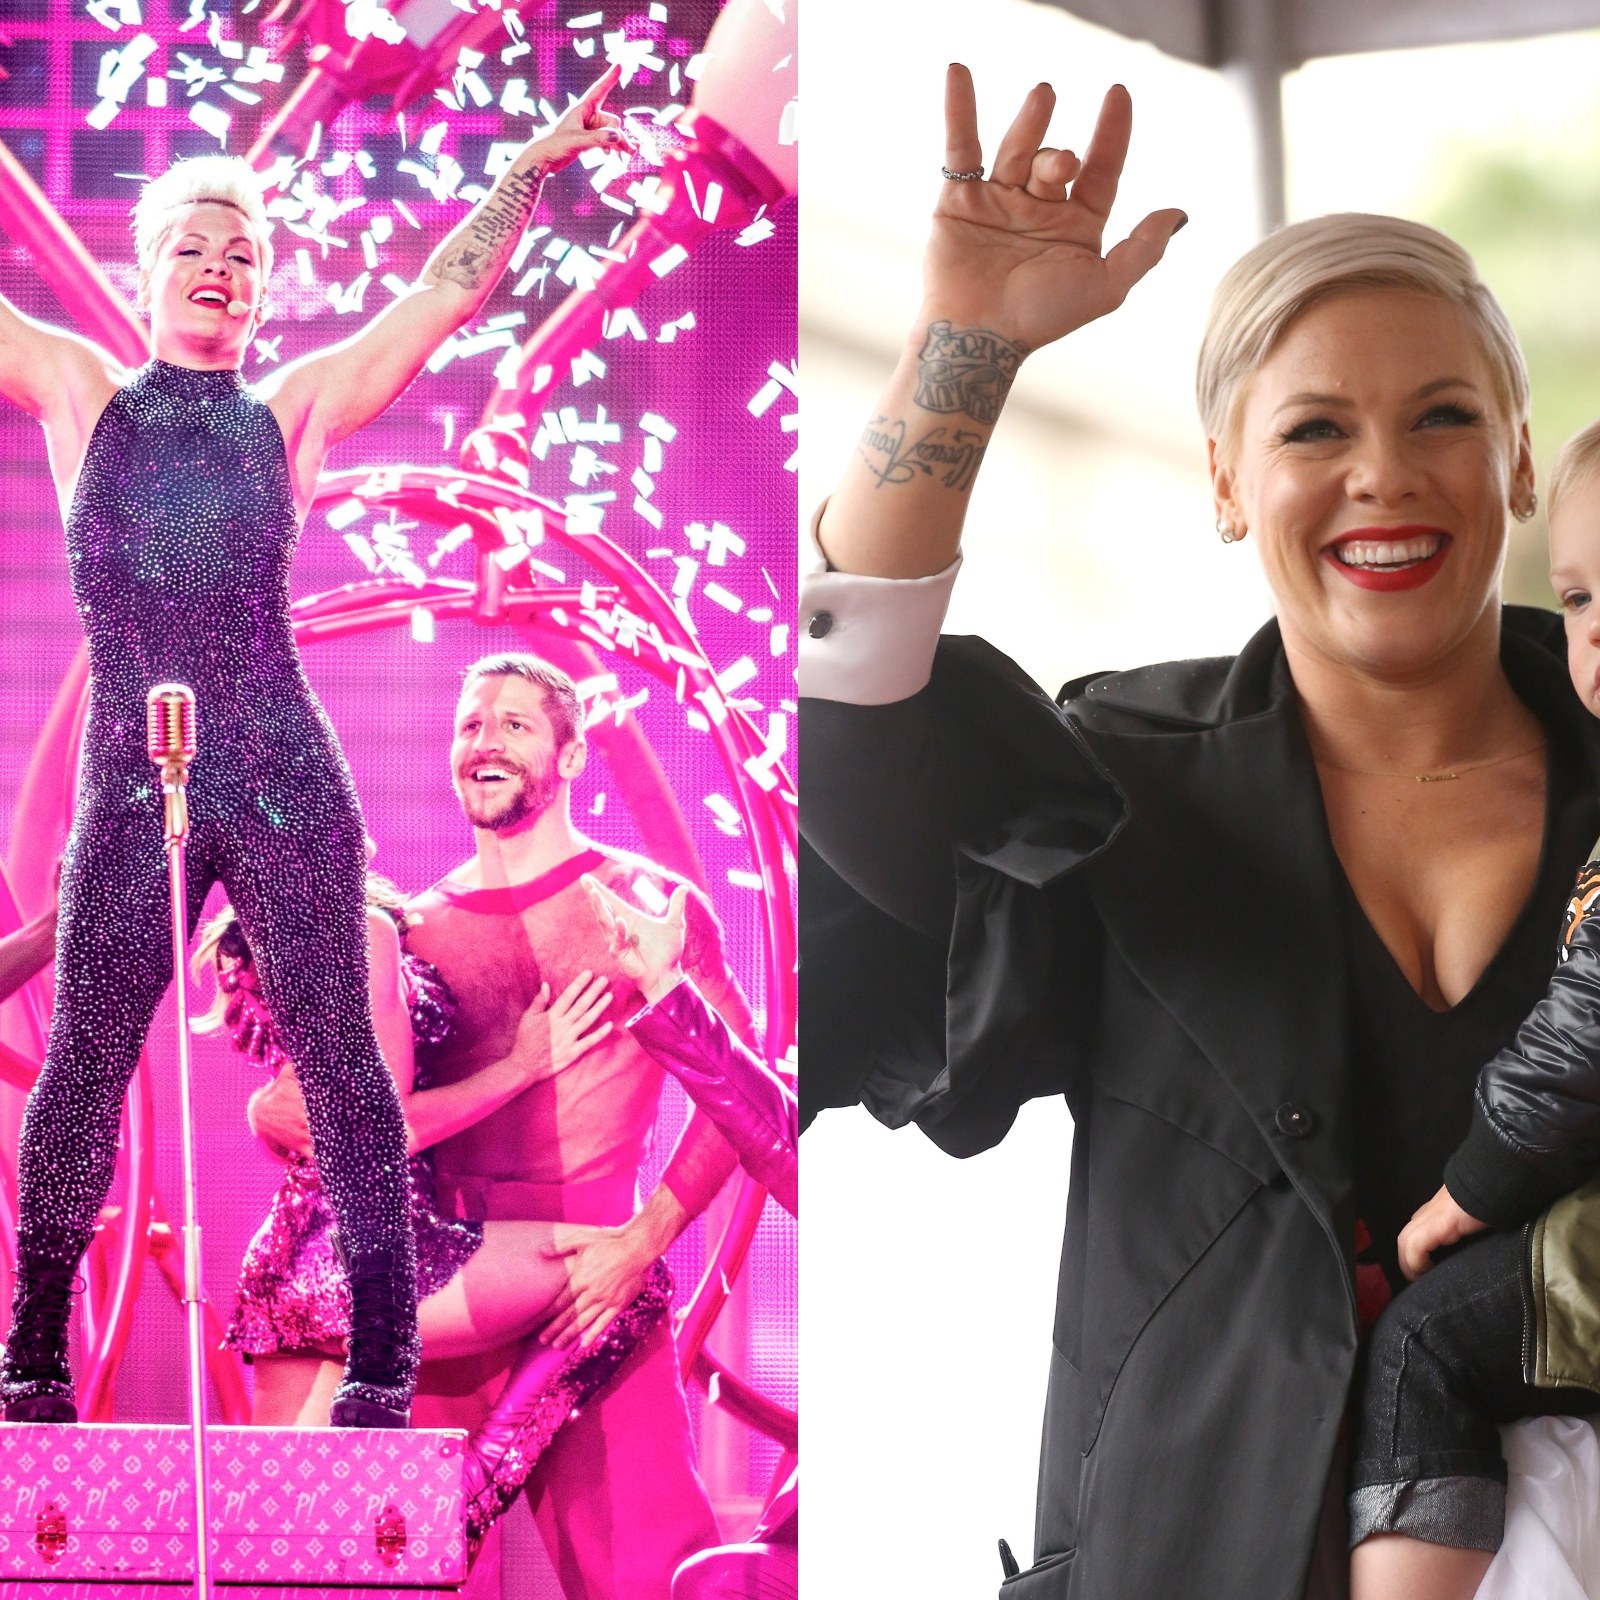 Pink Anti-Abortion Fans to to Her Music: 'We're Fine'